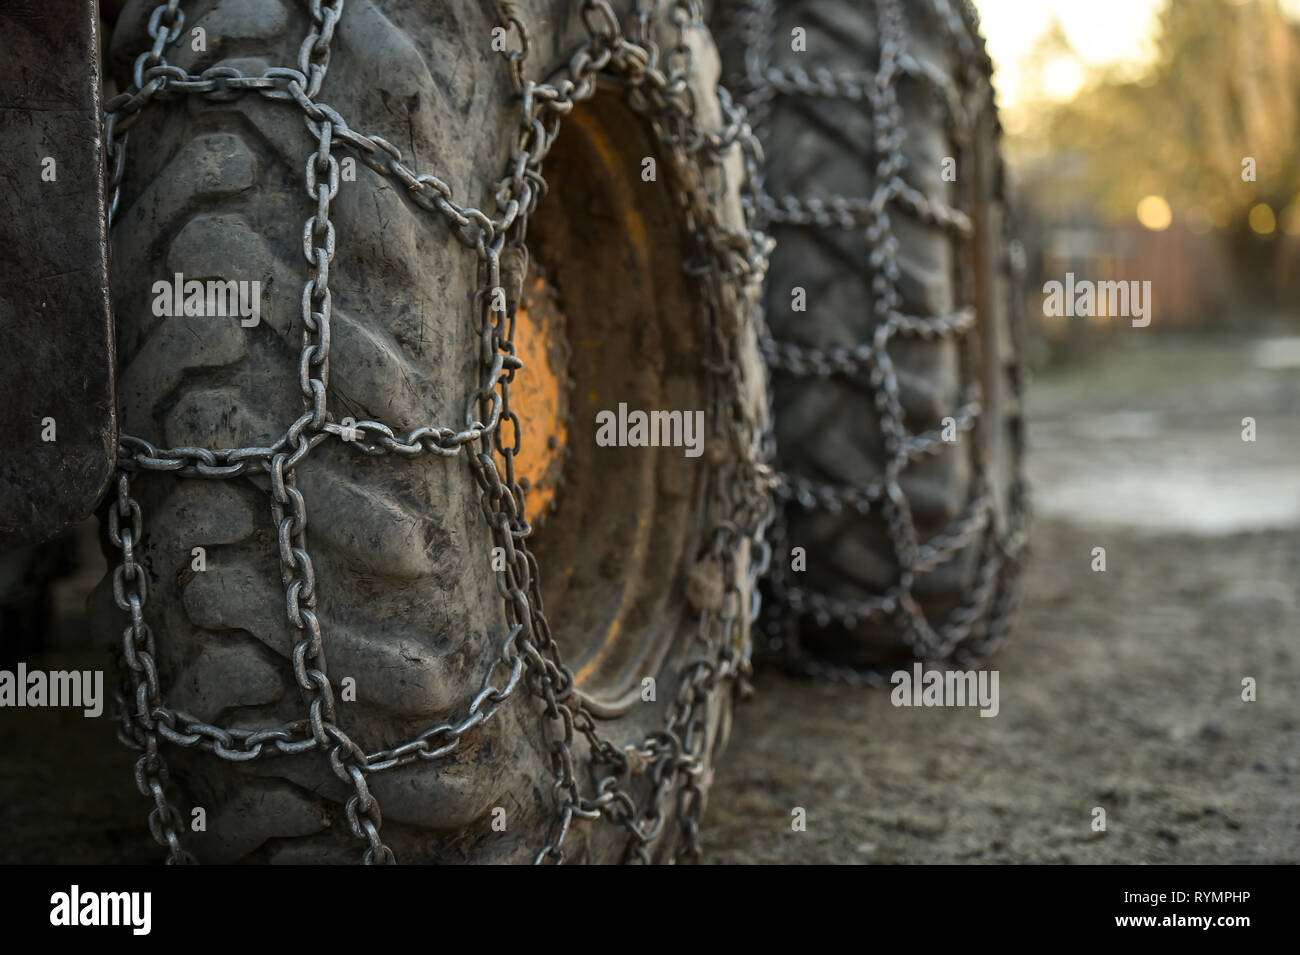 Photo detail with snow tire chains on big truck wheel Stock Photo